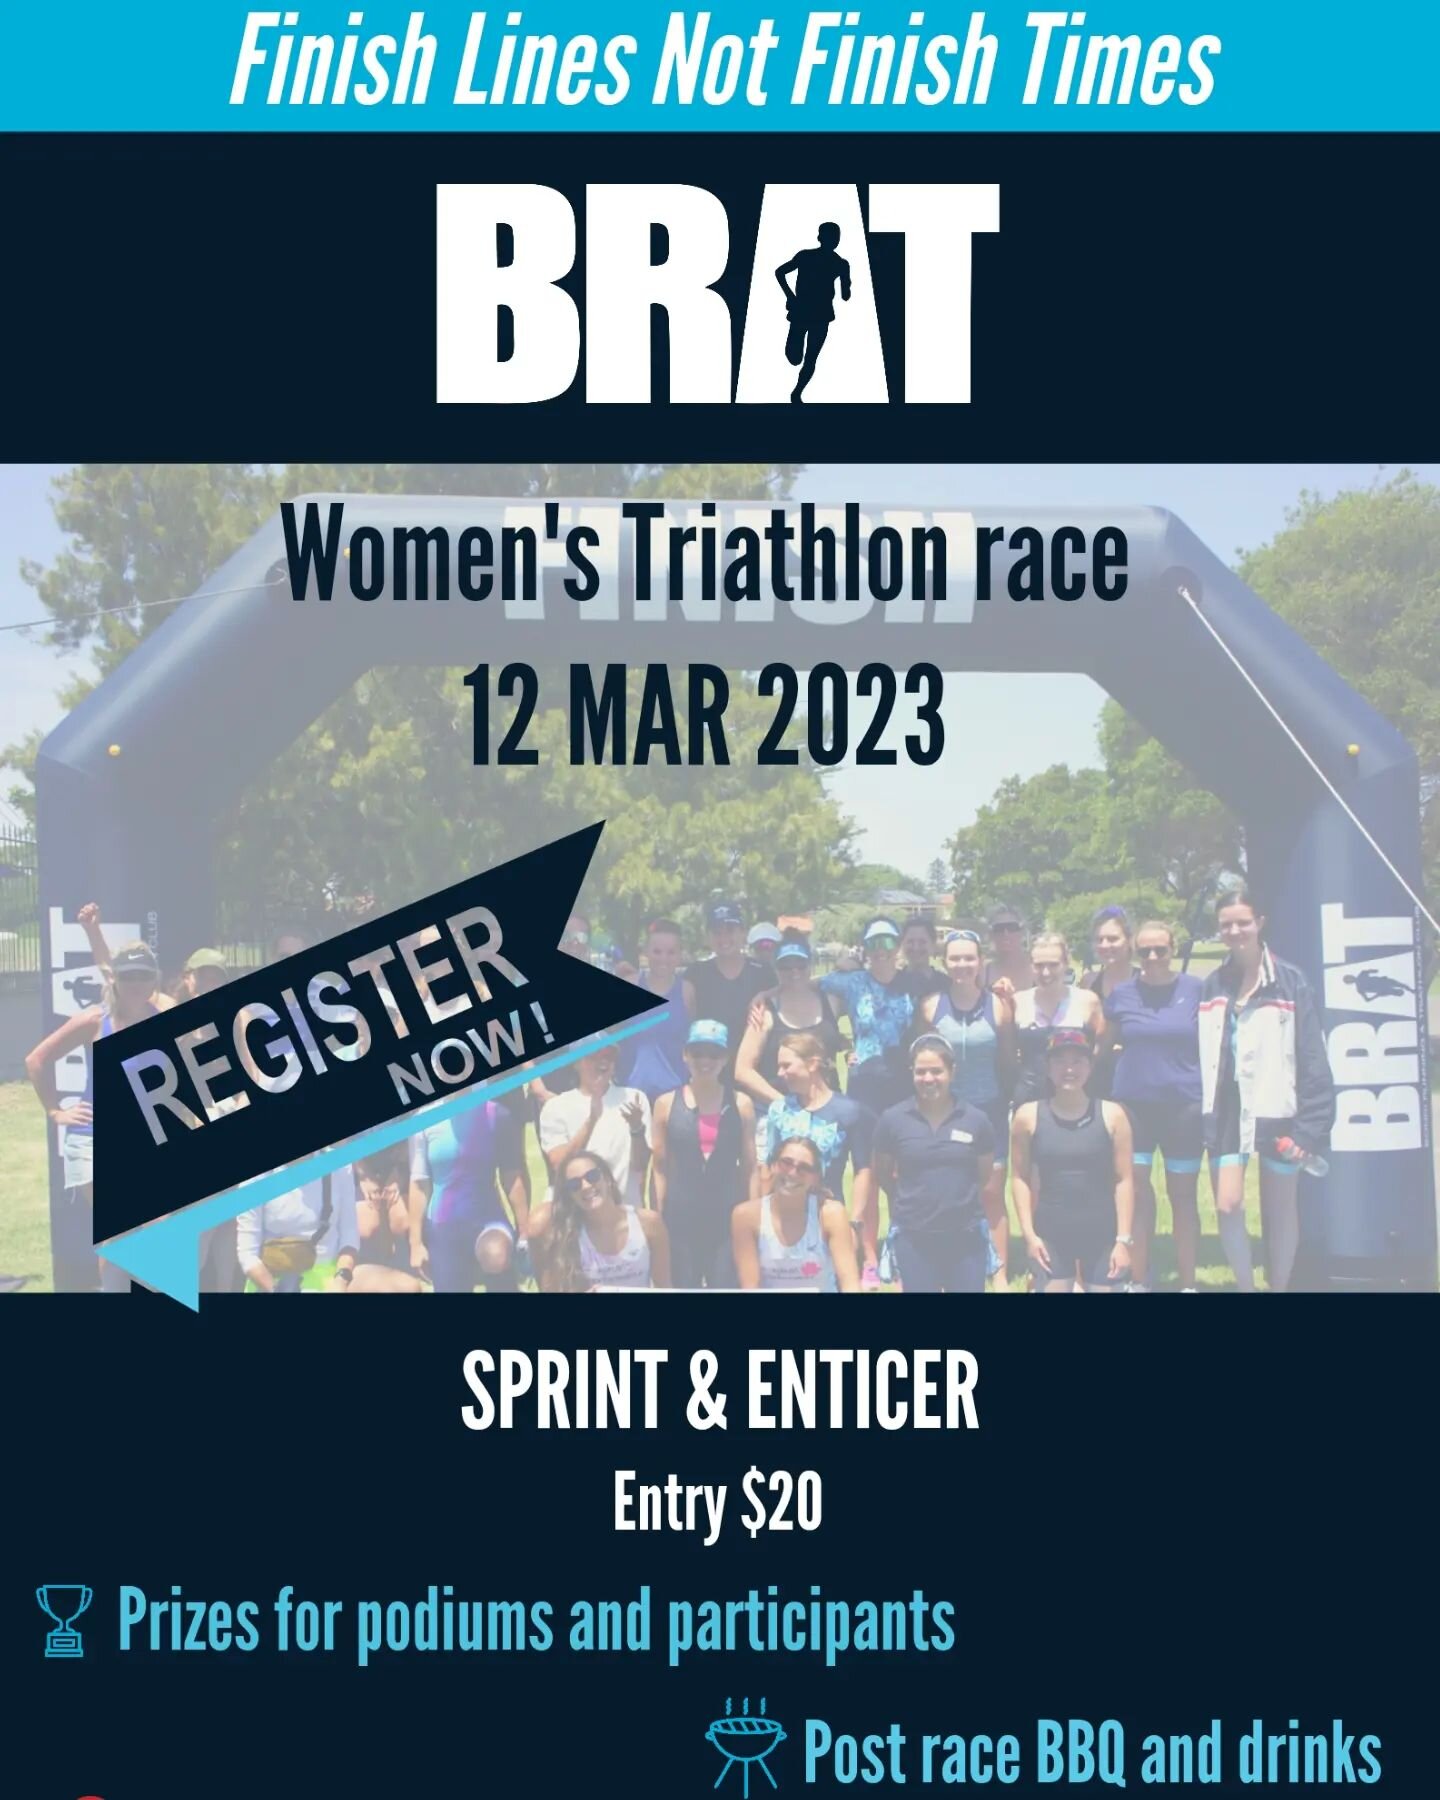 Our Saturday's race will kick off with our women's waves. All levels are welcome!

If you have never done a tri before our lovely triathletes will be there to help you set up 😊

Sign up now https://www.bratclub.com.au/eastern-tri-series/races